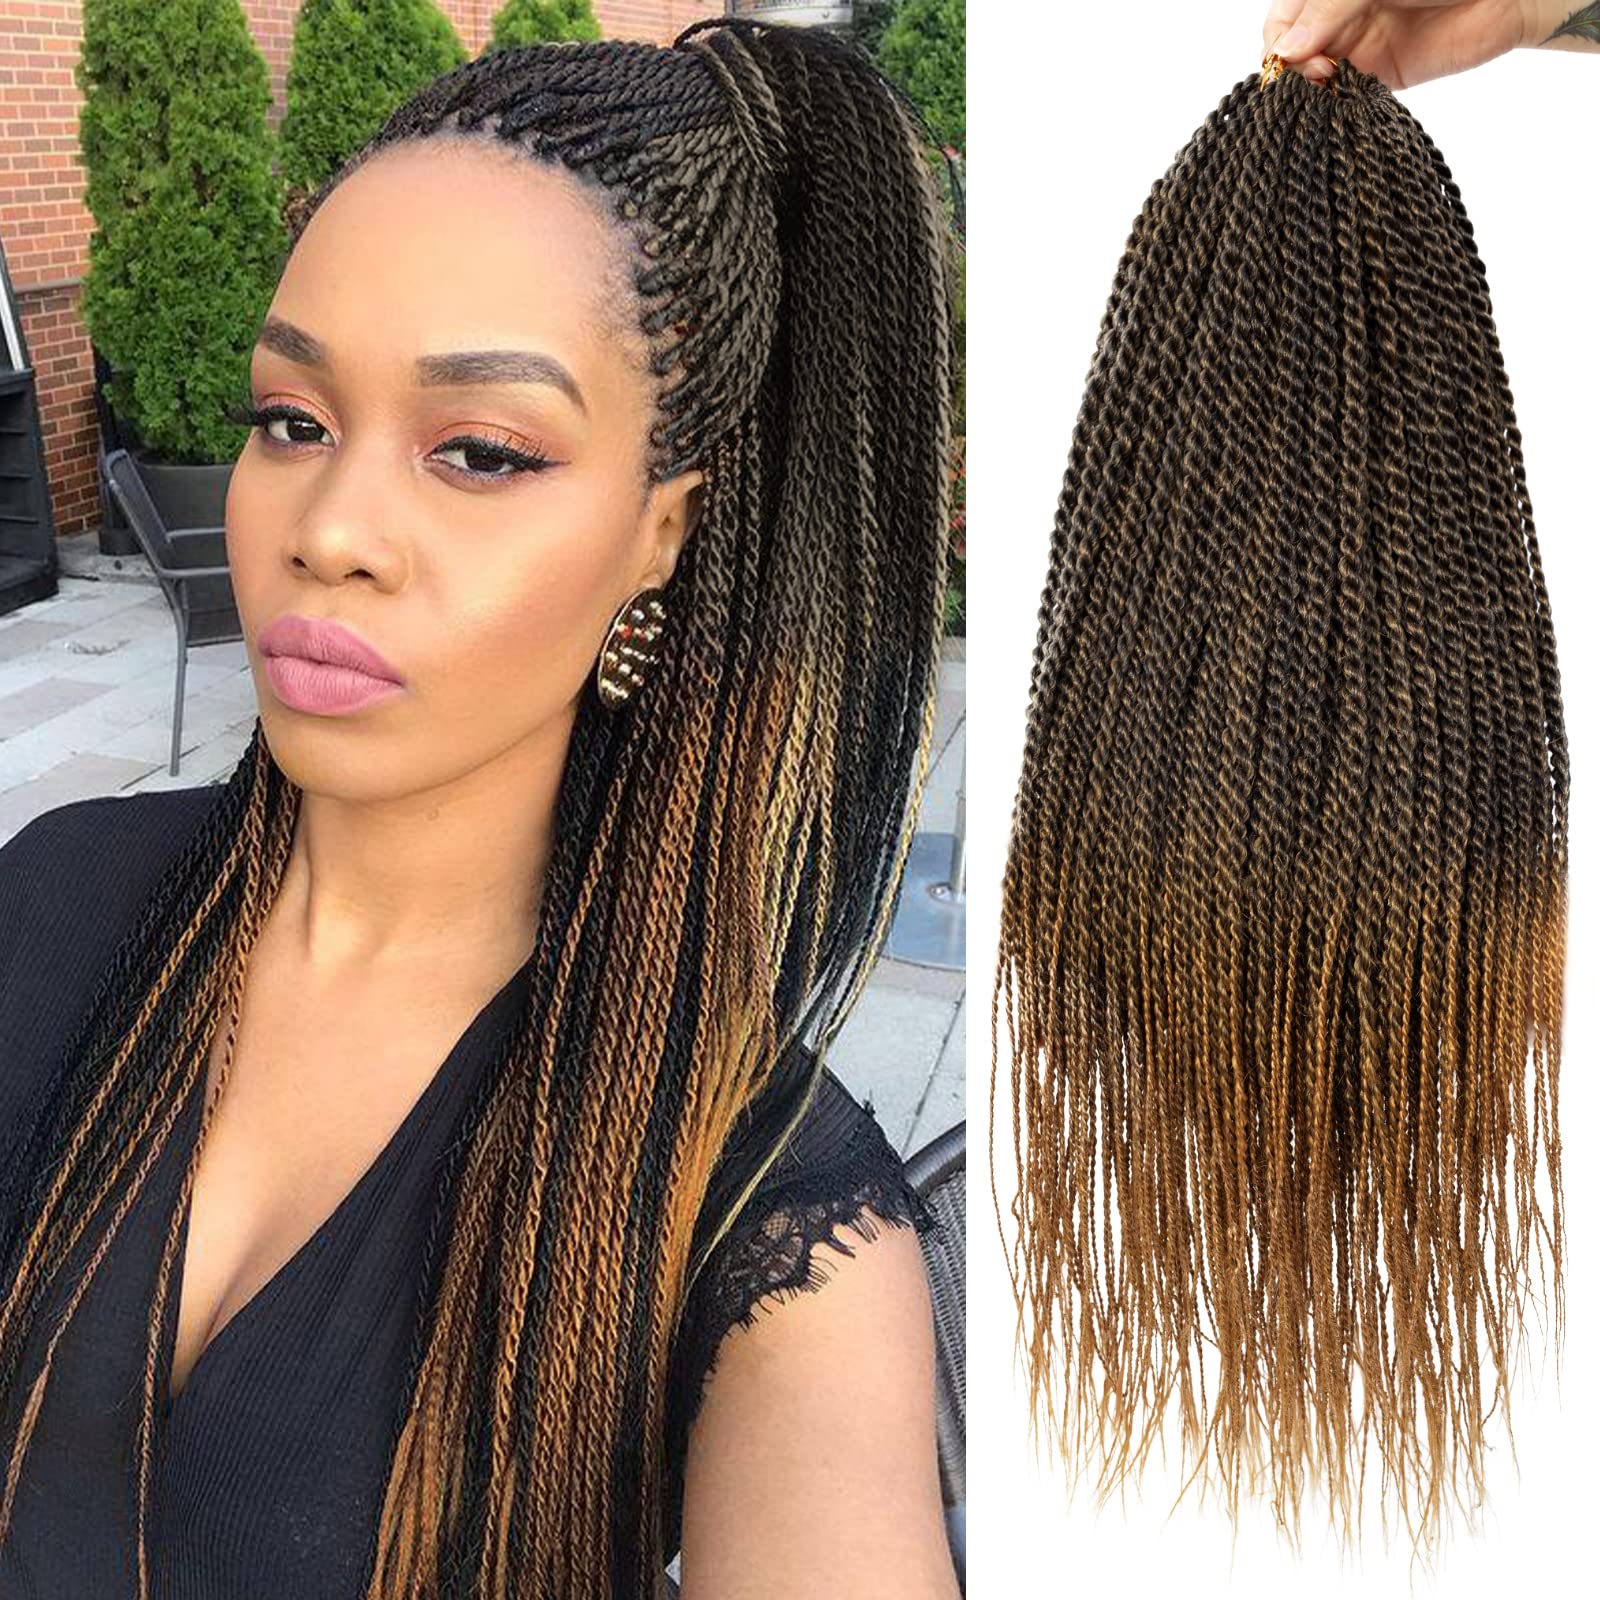 14 18 22Inch Senegalese Twist Hair Crochet Braids 30Stands Synthetic Braiding Hair Extensions for Black Women